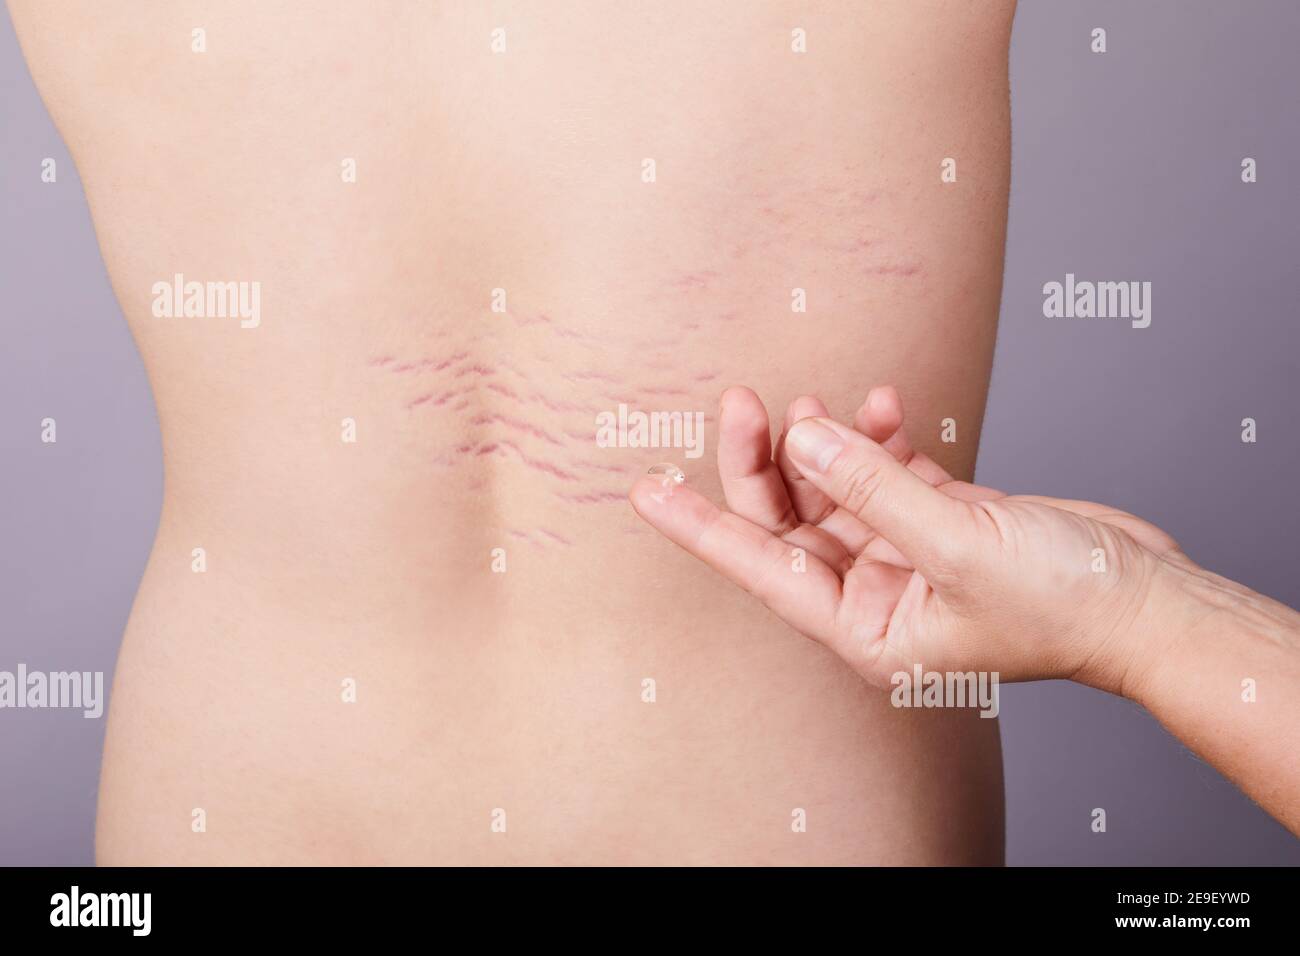 Close up view of the back with striae distensae (striae rubrae) on the  skin. The concept of impaired skin elasticity during puberty Stock Photo -  Alamy